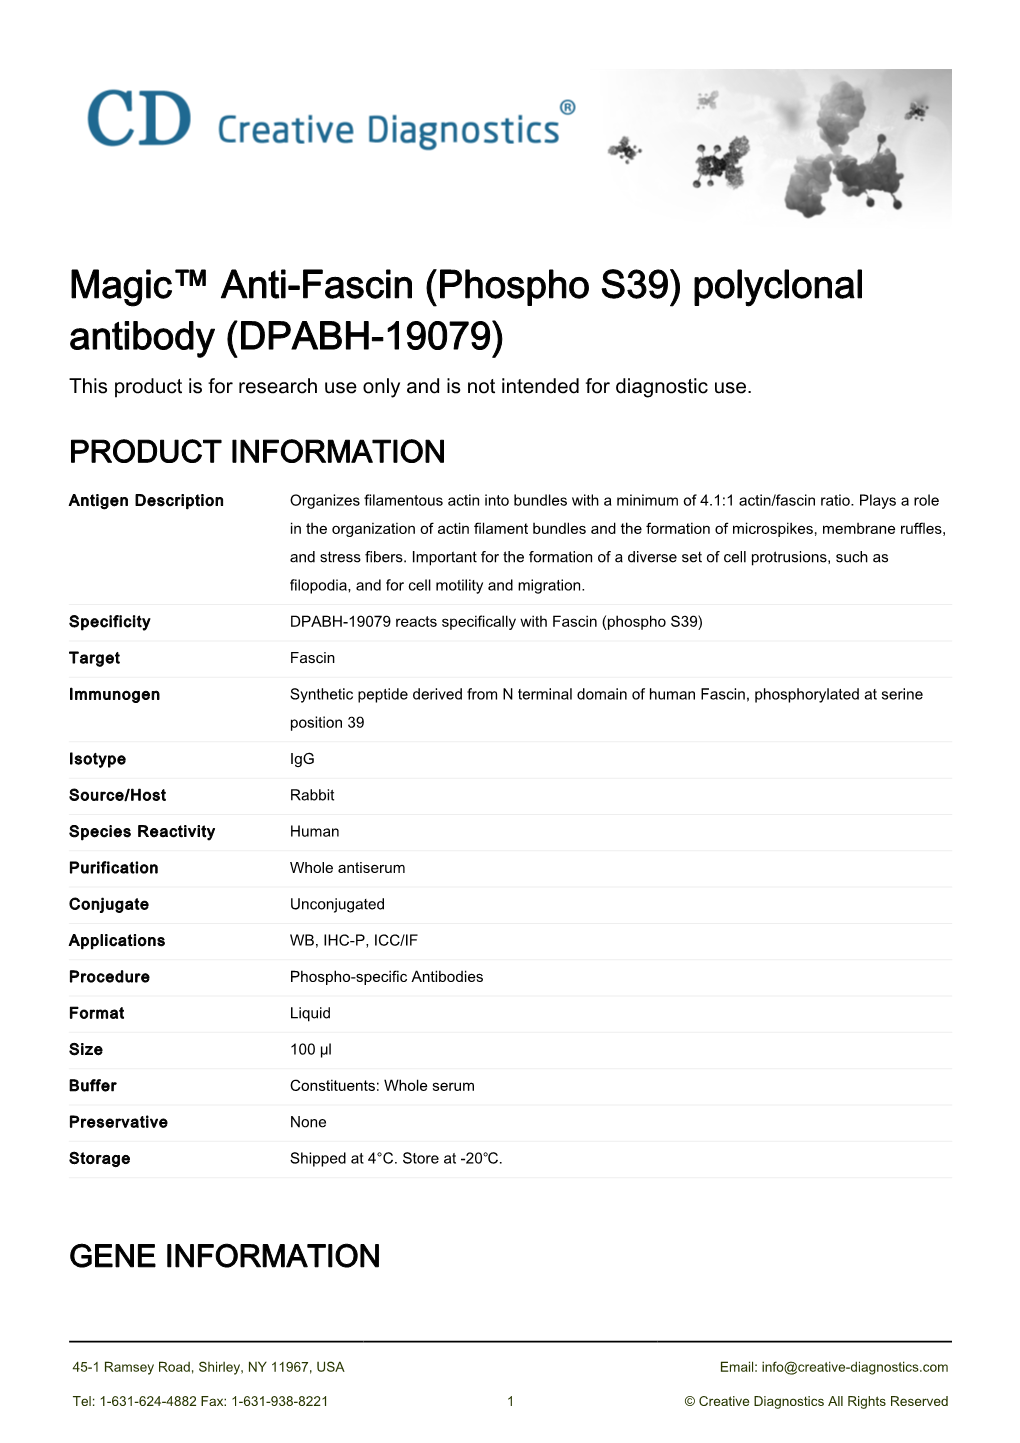 Magic™ Anti-Fascin (Phospho S39) Polyclonal Antibody (DPABH-19079) This Product Is for Research Use Only and Is Not Intended for Diagnostic Use